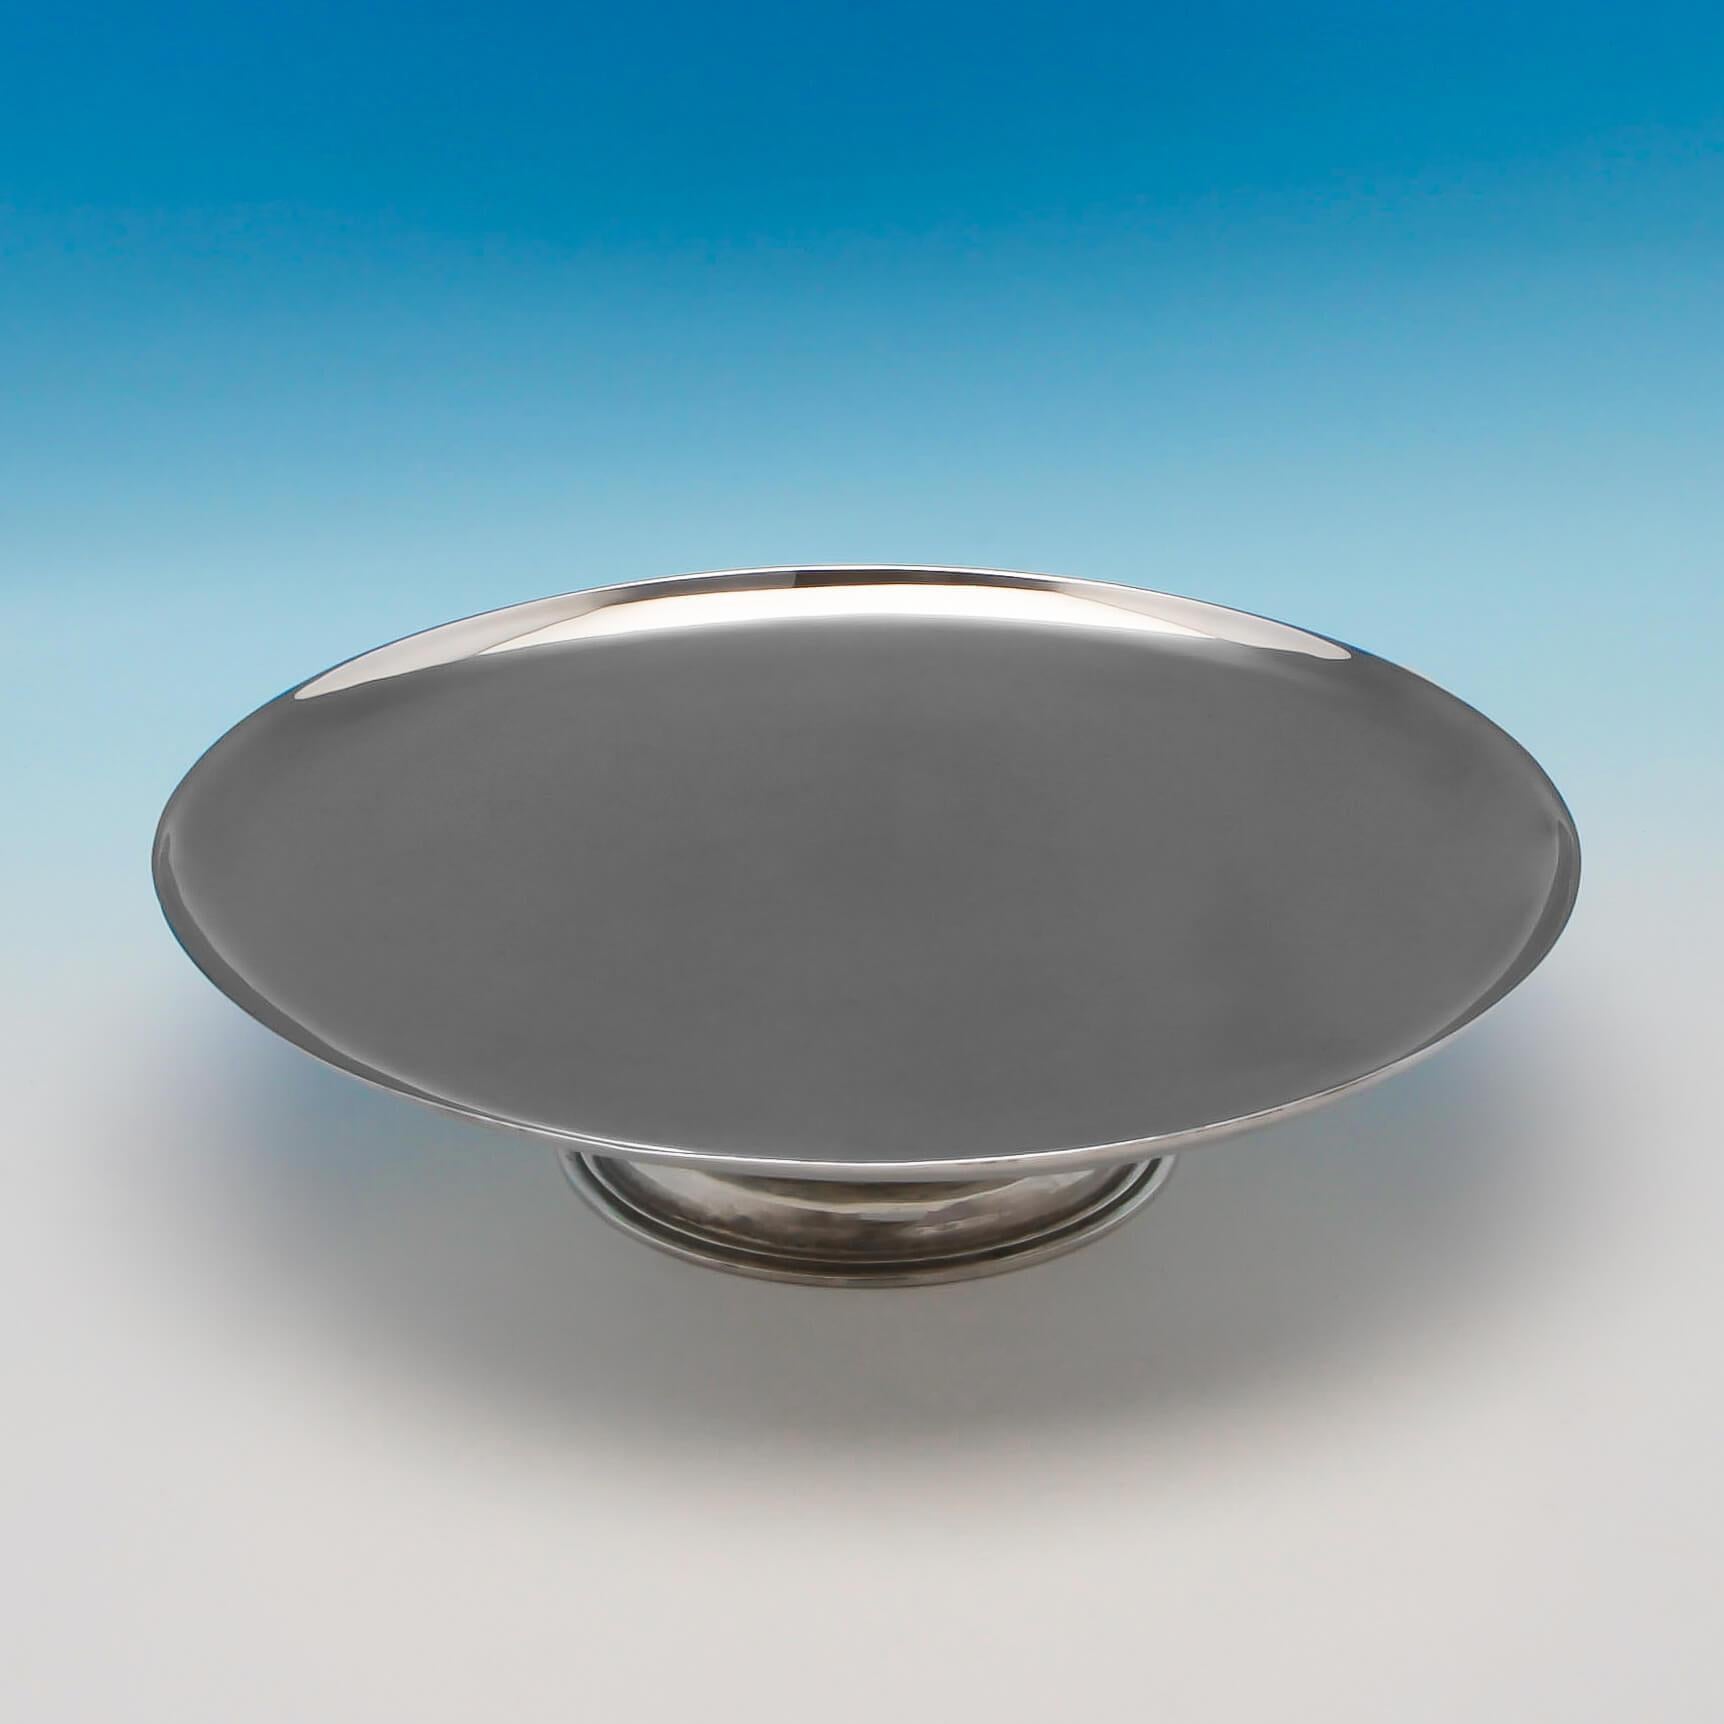 Hallmarked in London in 1934 by Parson Brothers for Tessiers, this fine quality, George V, Sterling Silver Tazza, is plain in style, featuring a hand hammered finish to the pedestal foot, and reed detailing. The tazza measures 2.5”(6cm) tall, by